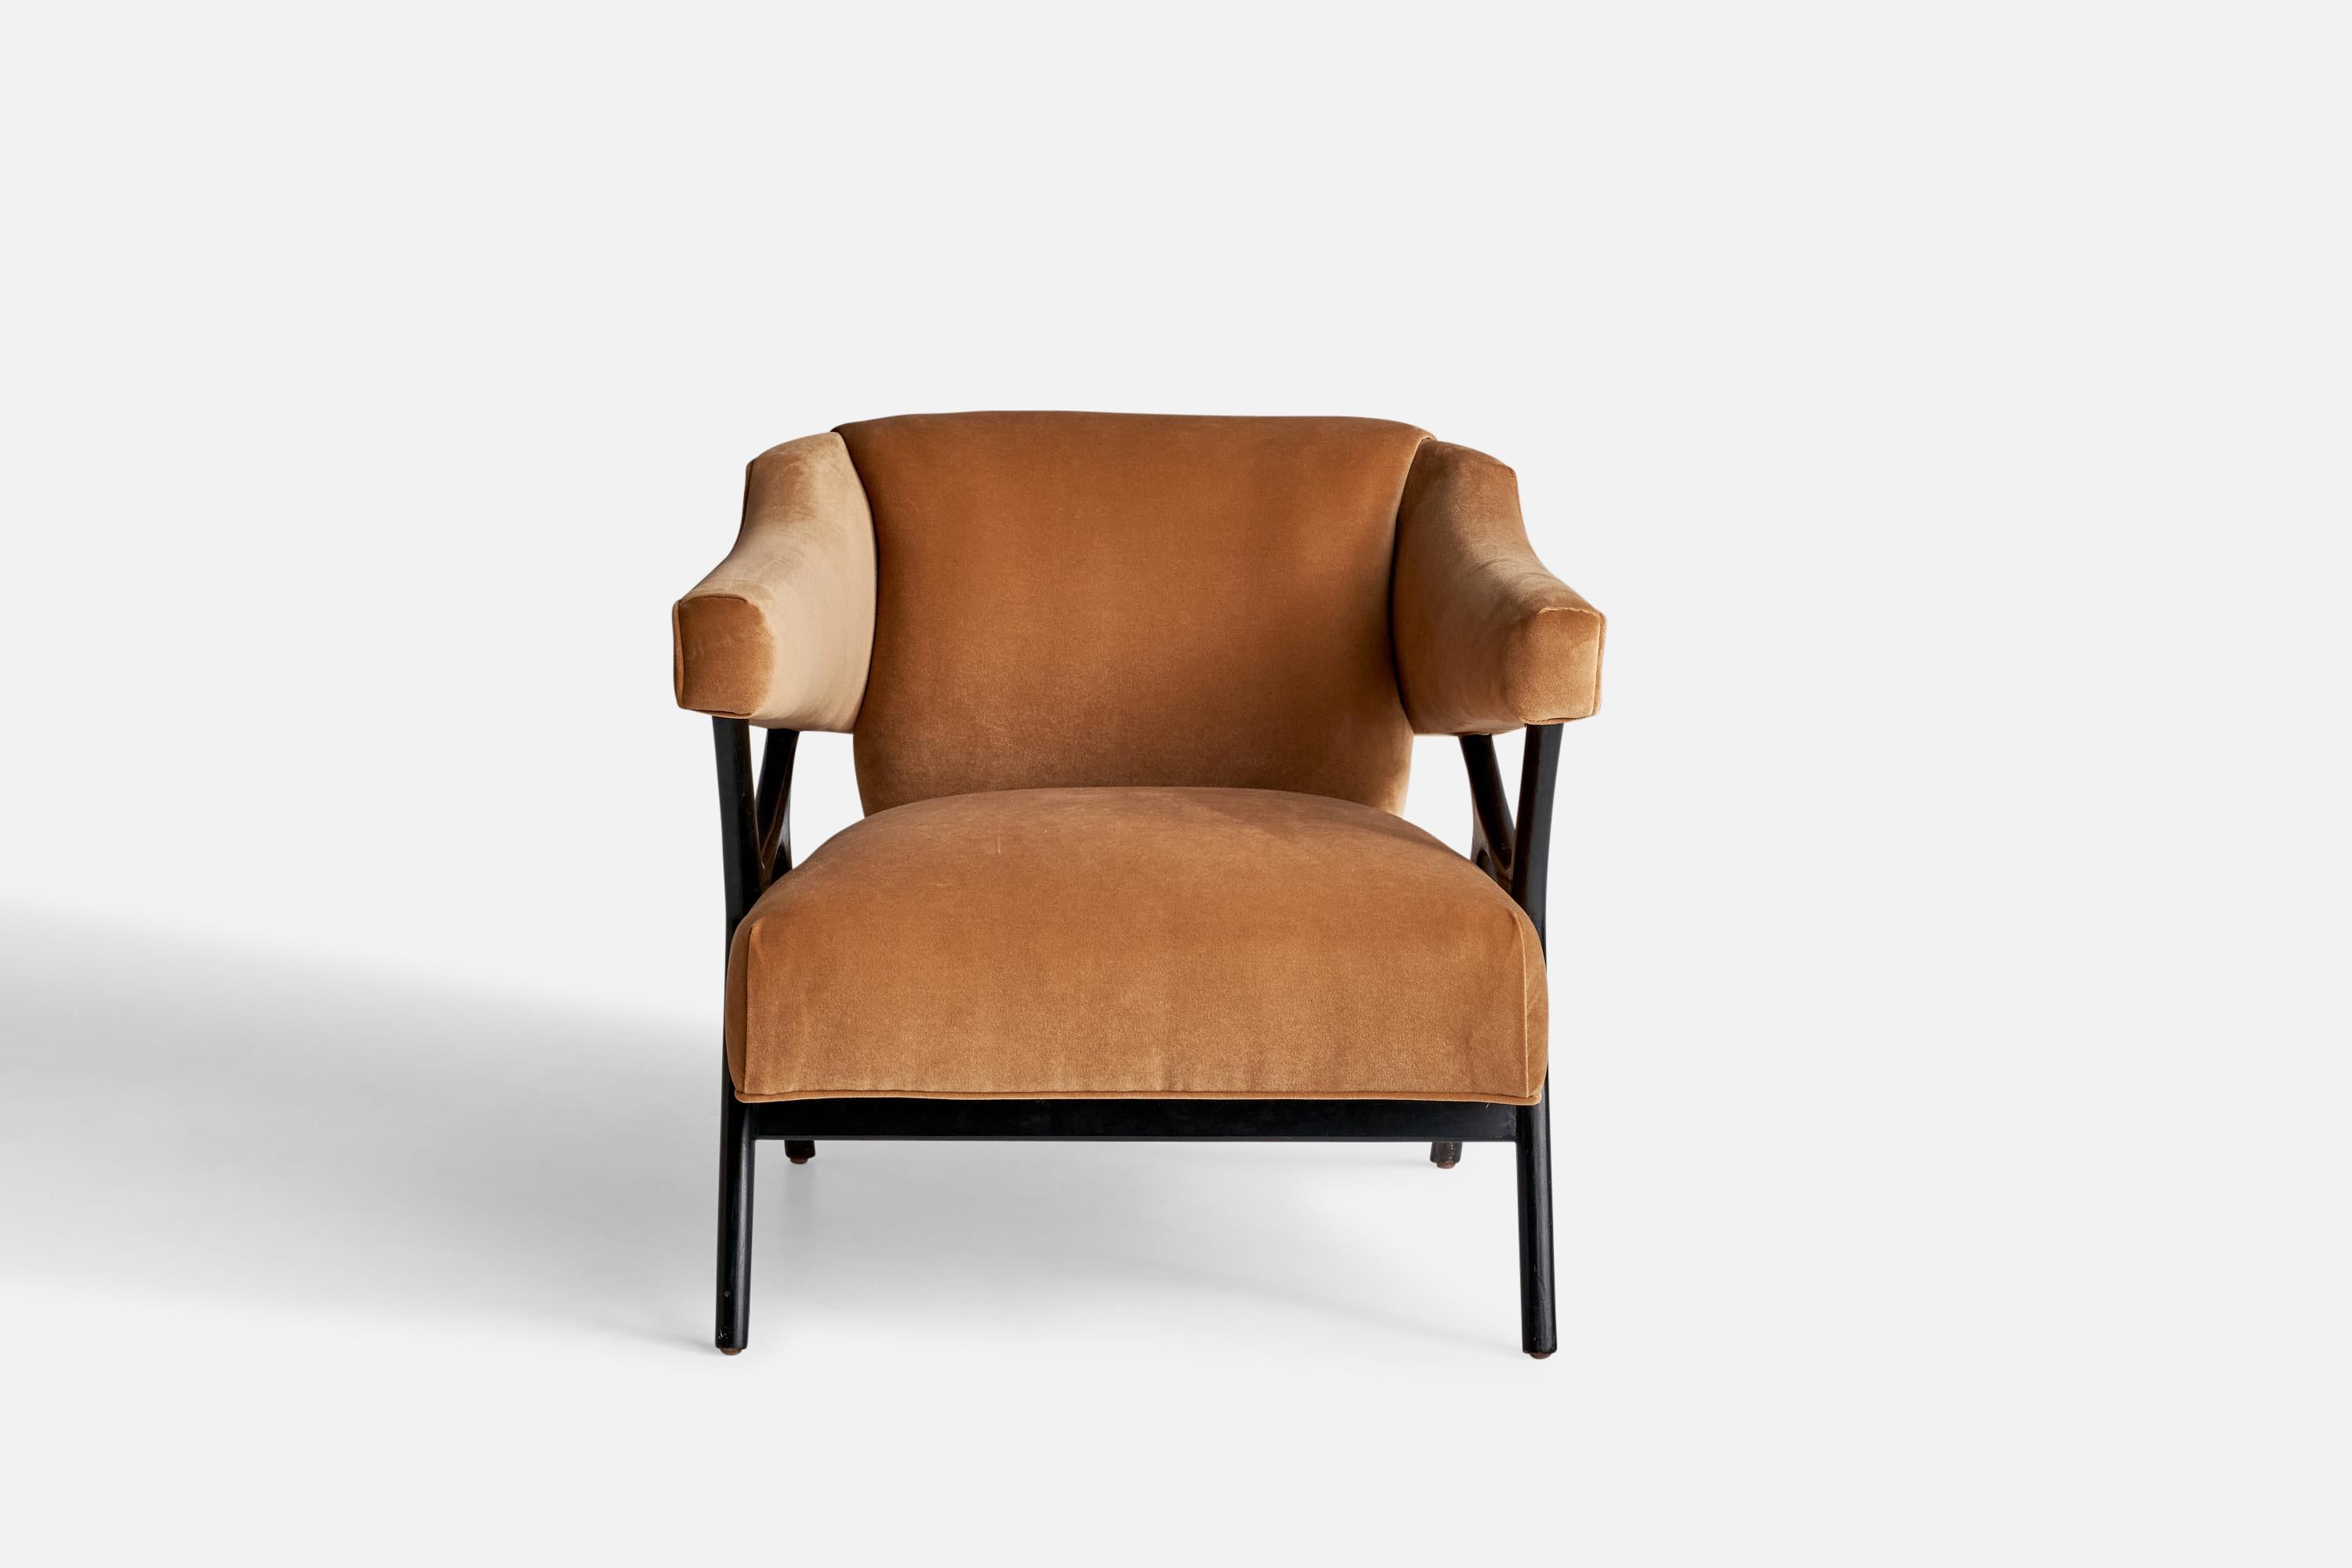 American Ward Bennet, Lounge Chair, Wood, Velvet, USA, 1958 For Sale